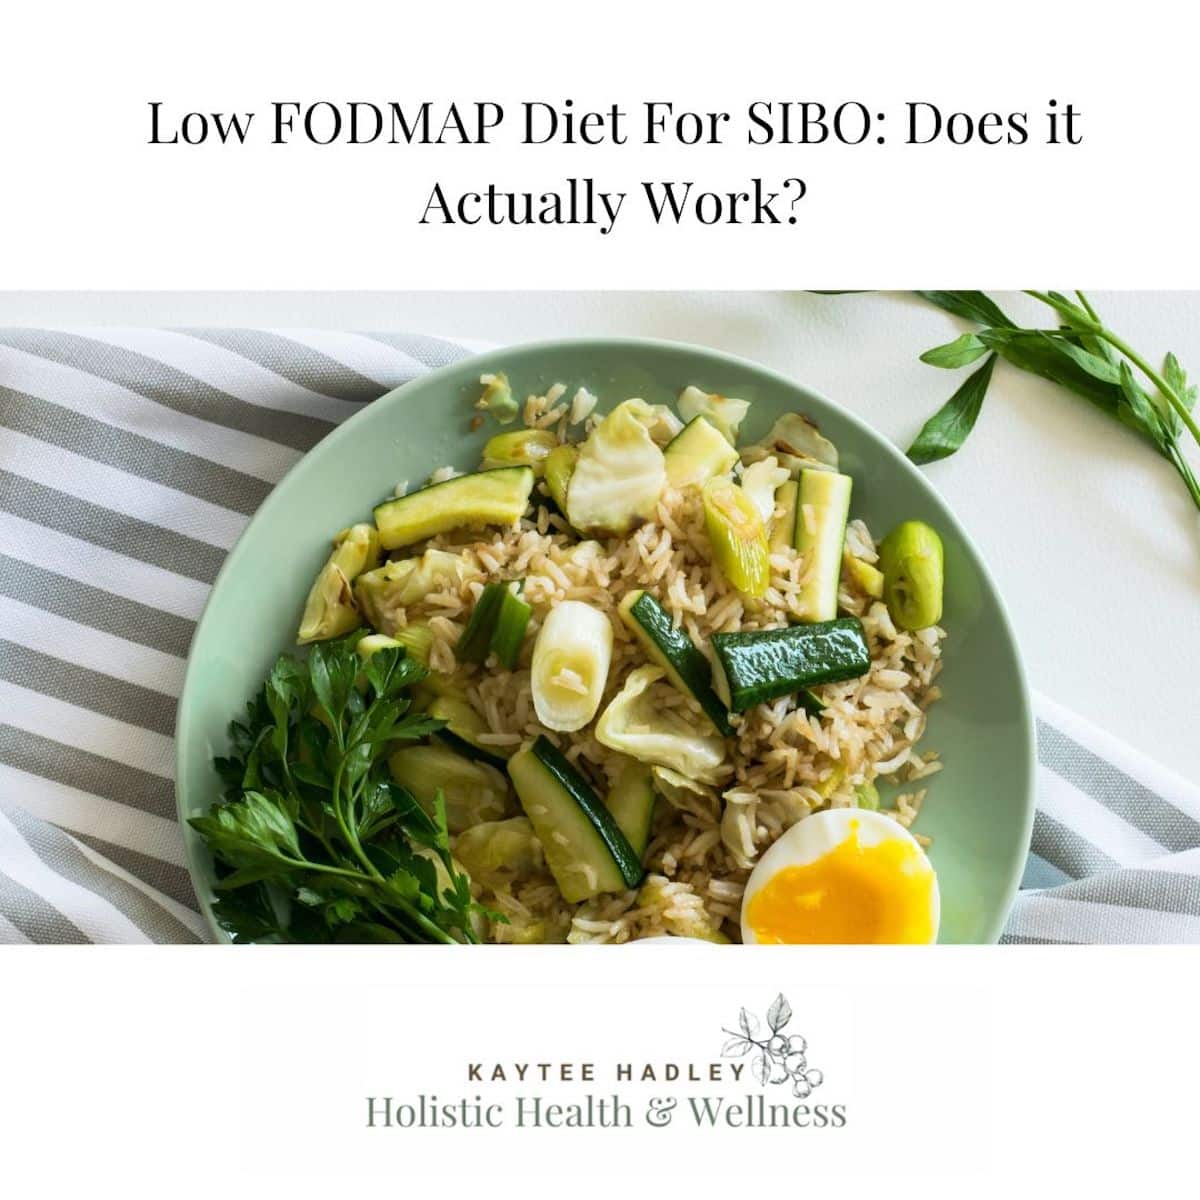 low formal diet for sibo: does it actually work?